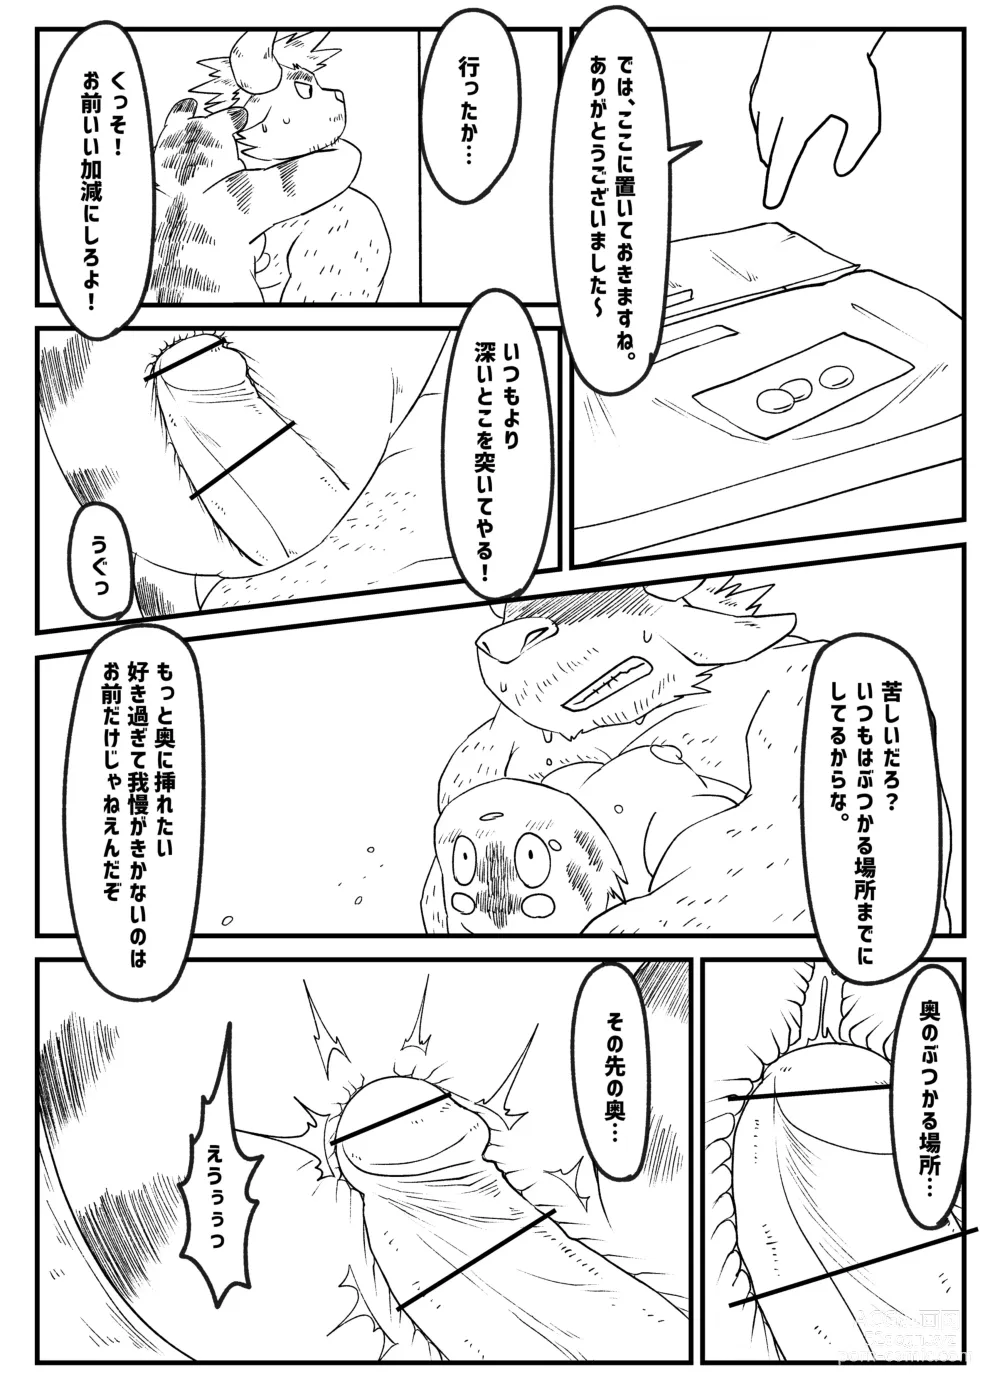 Page 10 of doujinshi Muscular Bull Teacher & Chubby Tiger Student 5